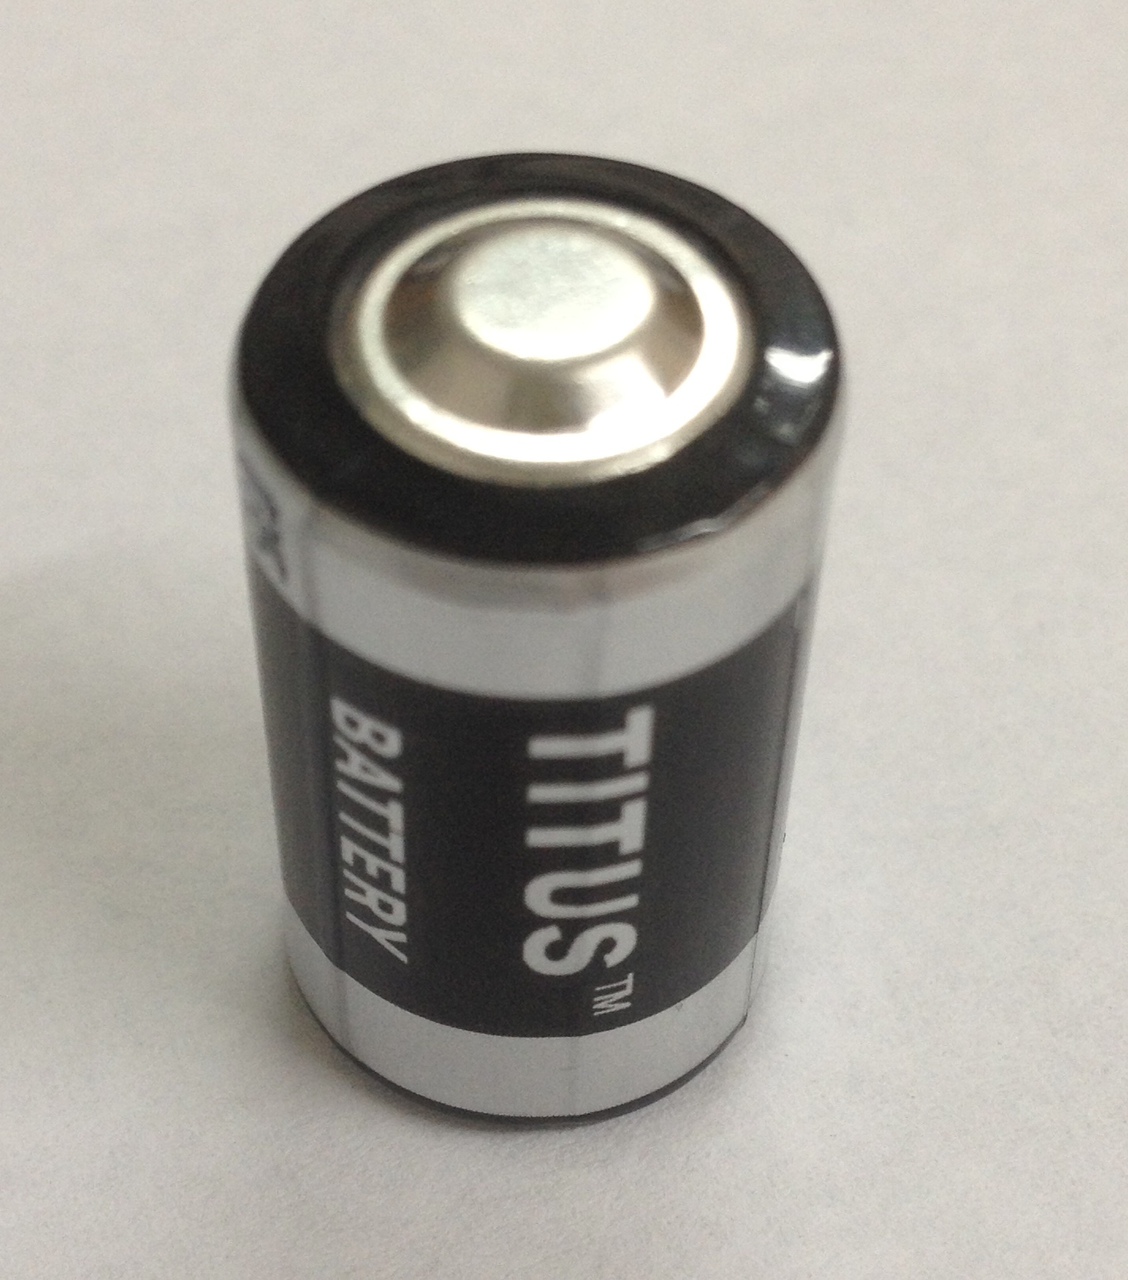 Titus 1/2 AA Size 3.6V ER14250T Lithium Battery With Solder Tabs - 10 Pack + Free Shipping!